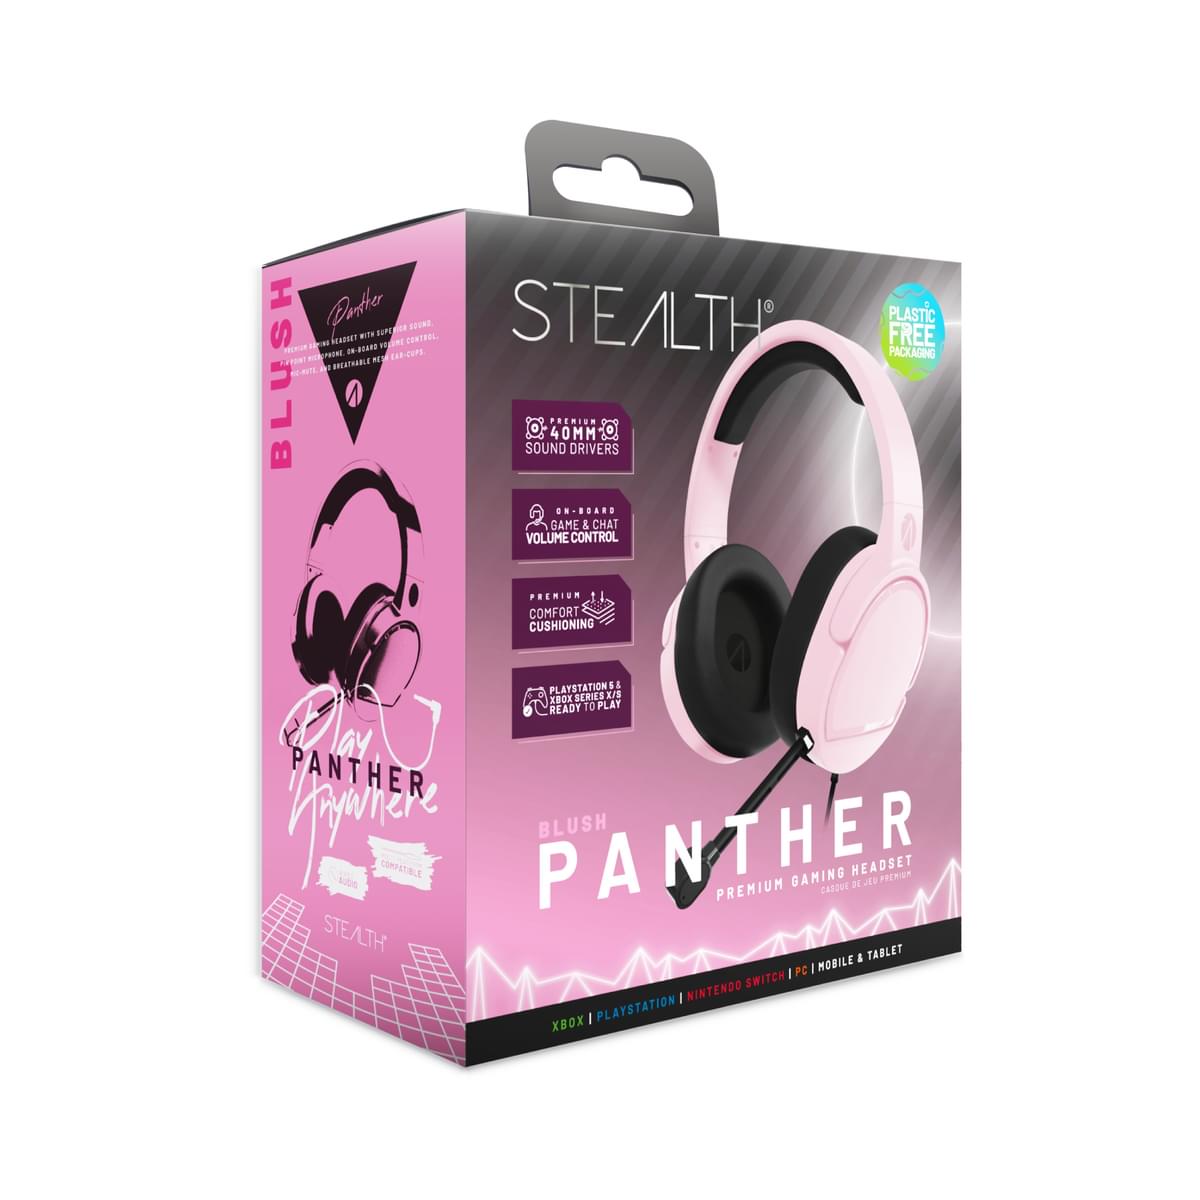 Stealth PANTHER Premium Gaming Headset for XBOX, PS4/PS5, Switch, PC - Bloom